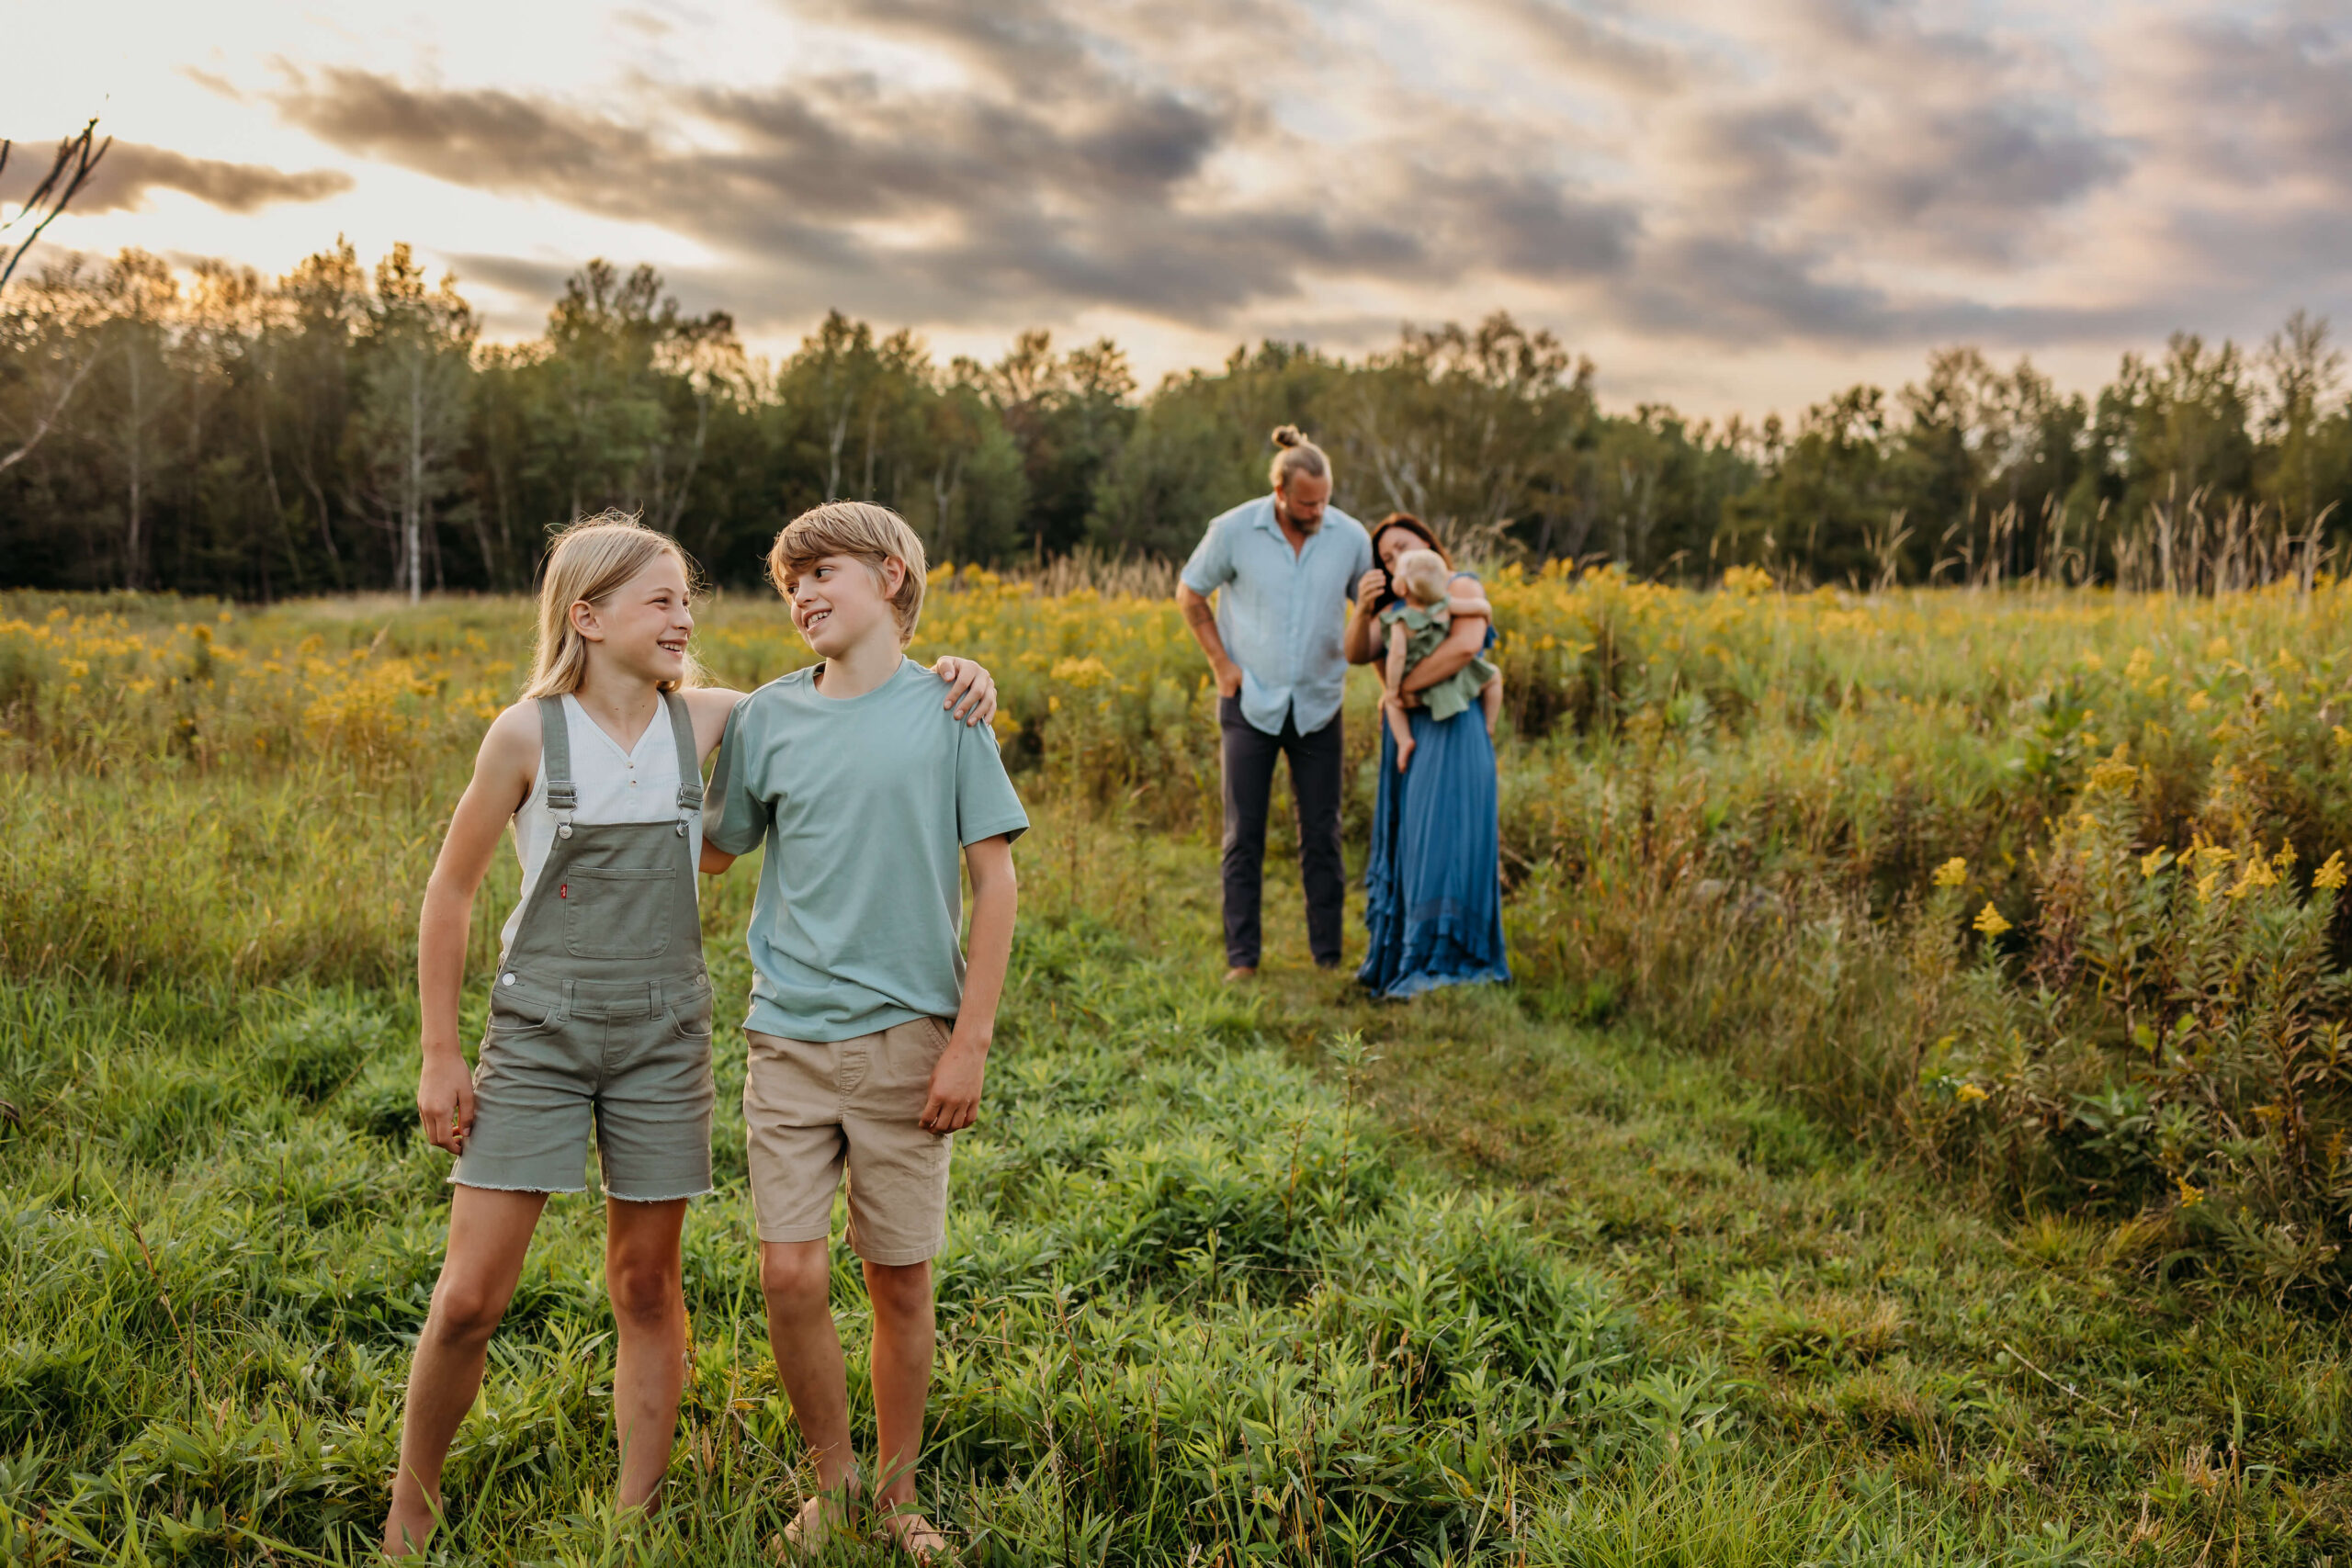 Twin brother and sister stand with arms around each other in a grassy field while mom and dad stand behind them on the trail playing with a toddler before some eau claire summer camps